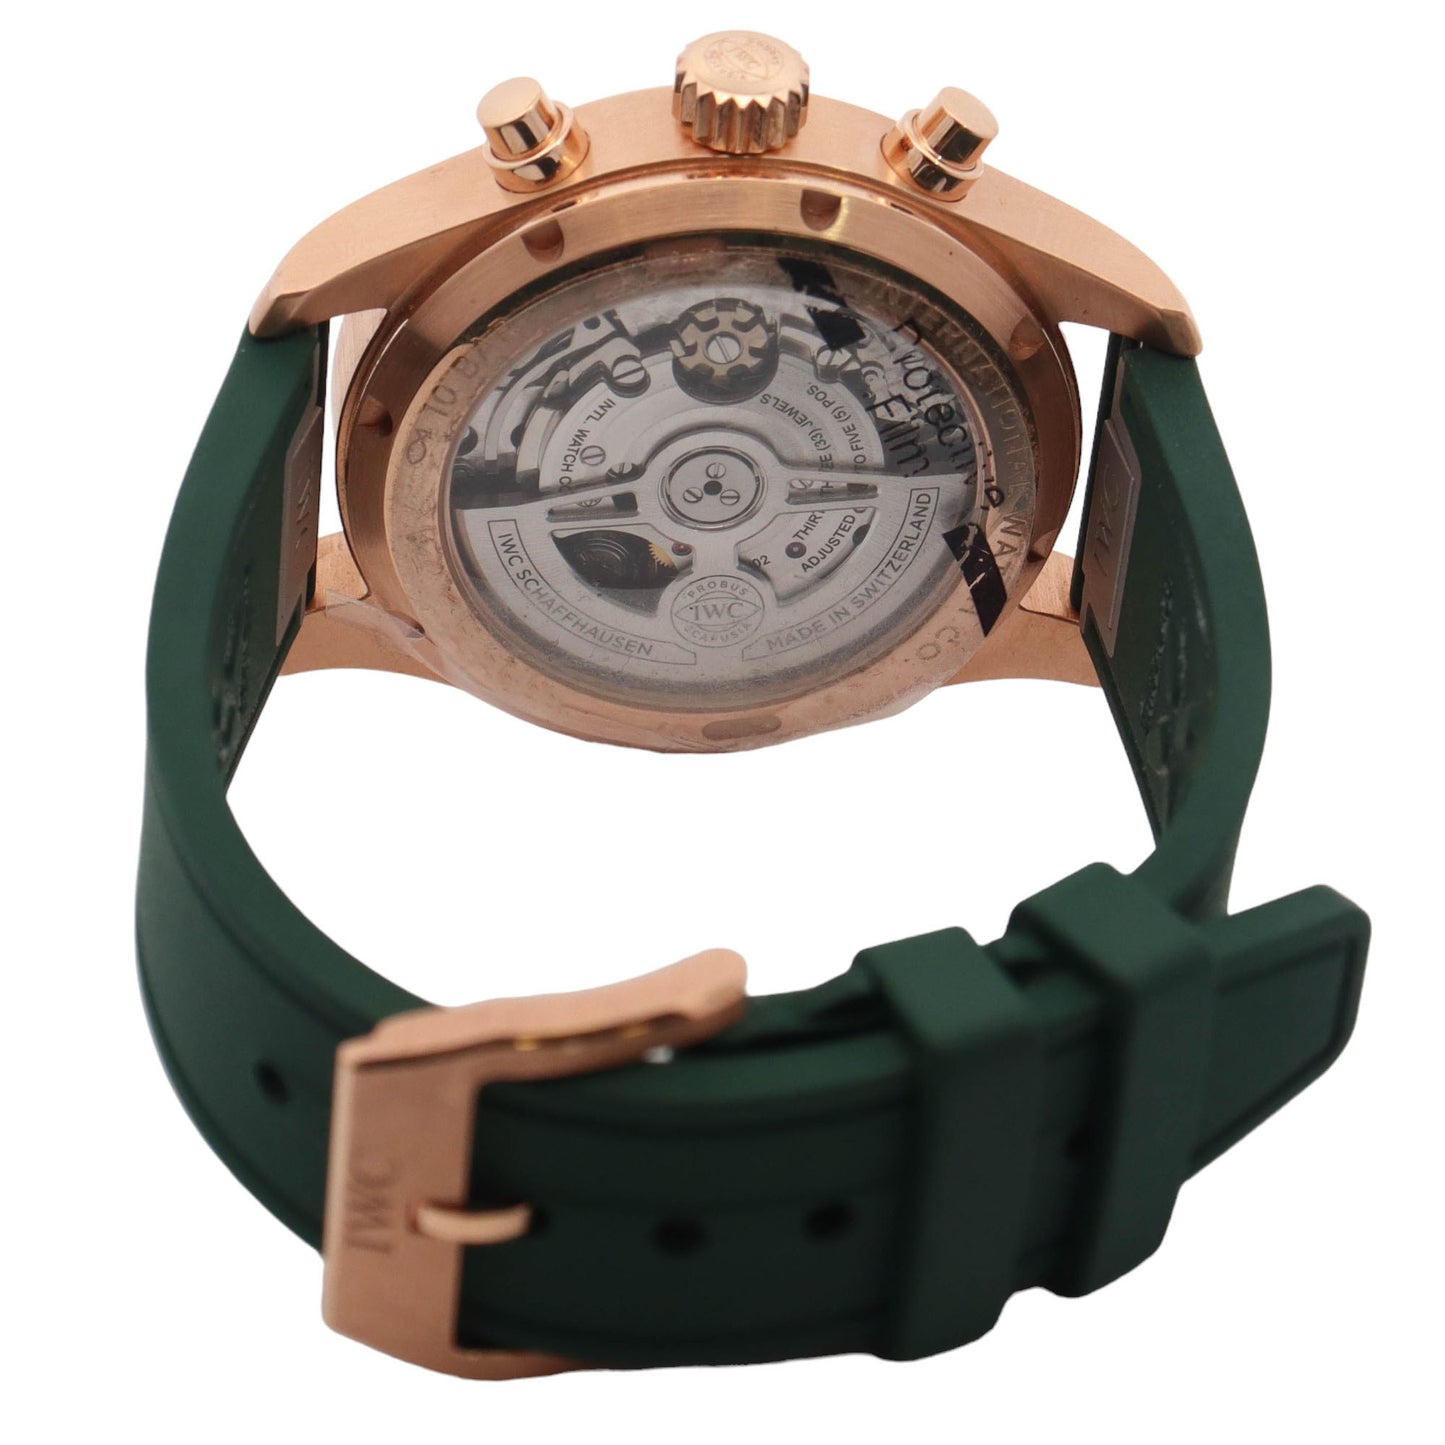 IWC Pilots Chronograph Rose Gold 41mm Green Chronograph Dial Watch Reference# IW388110